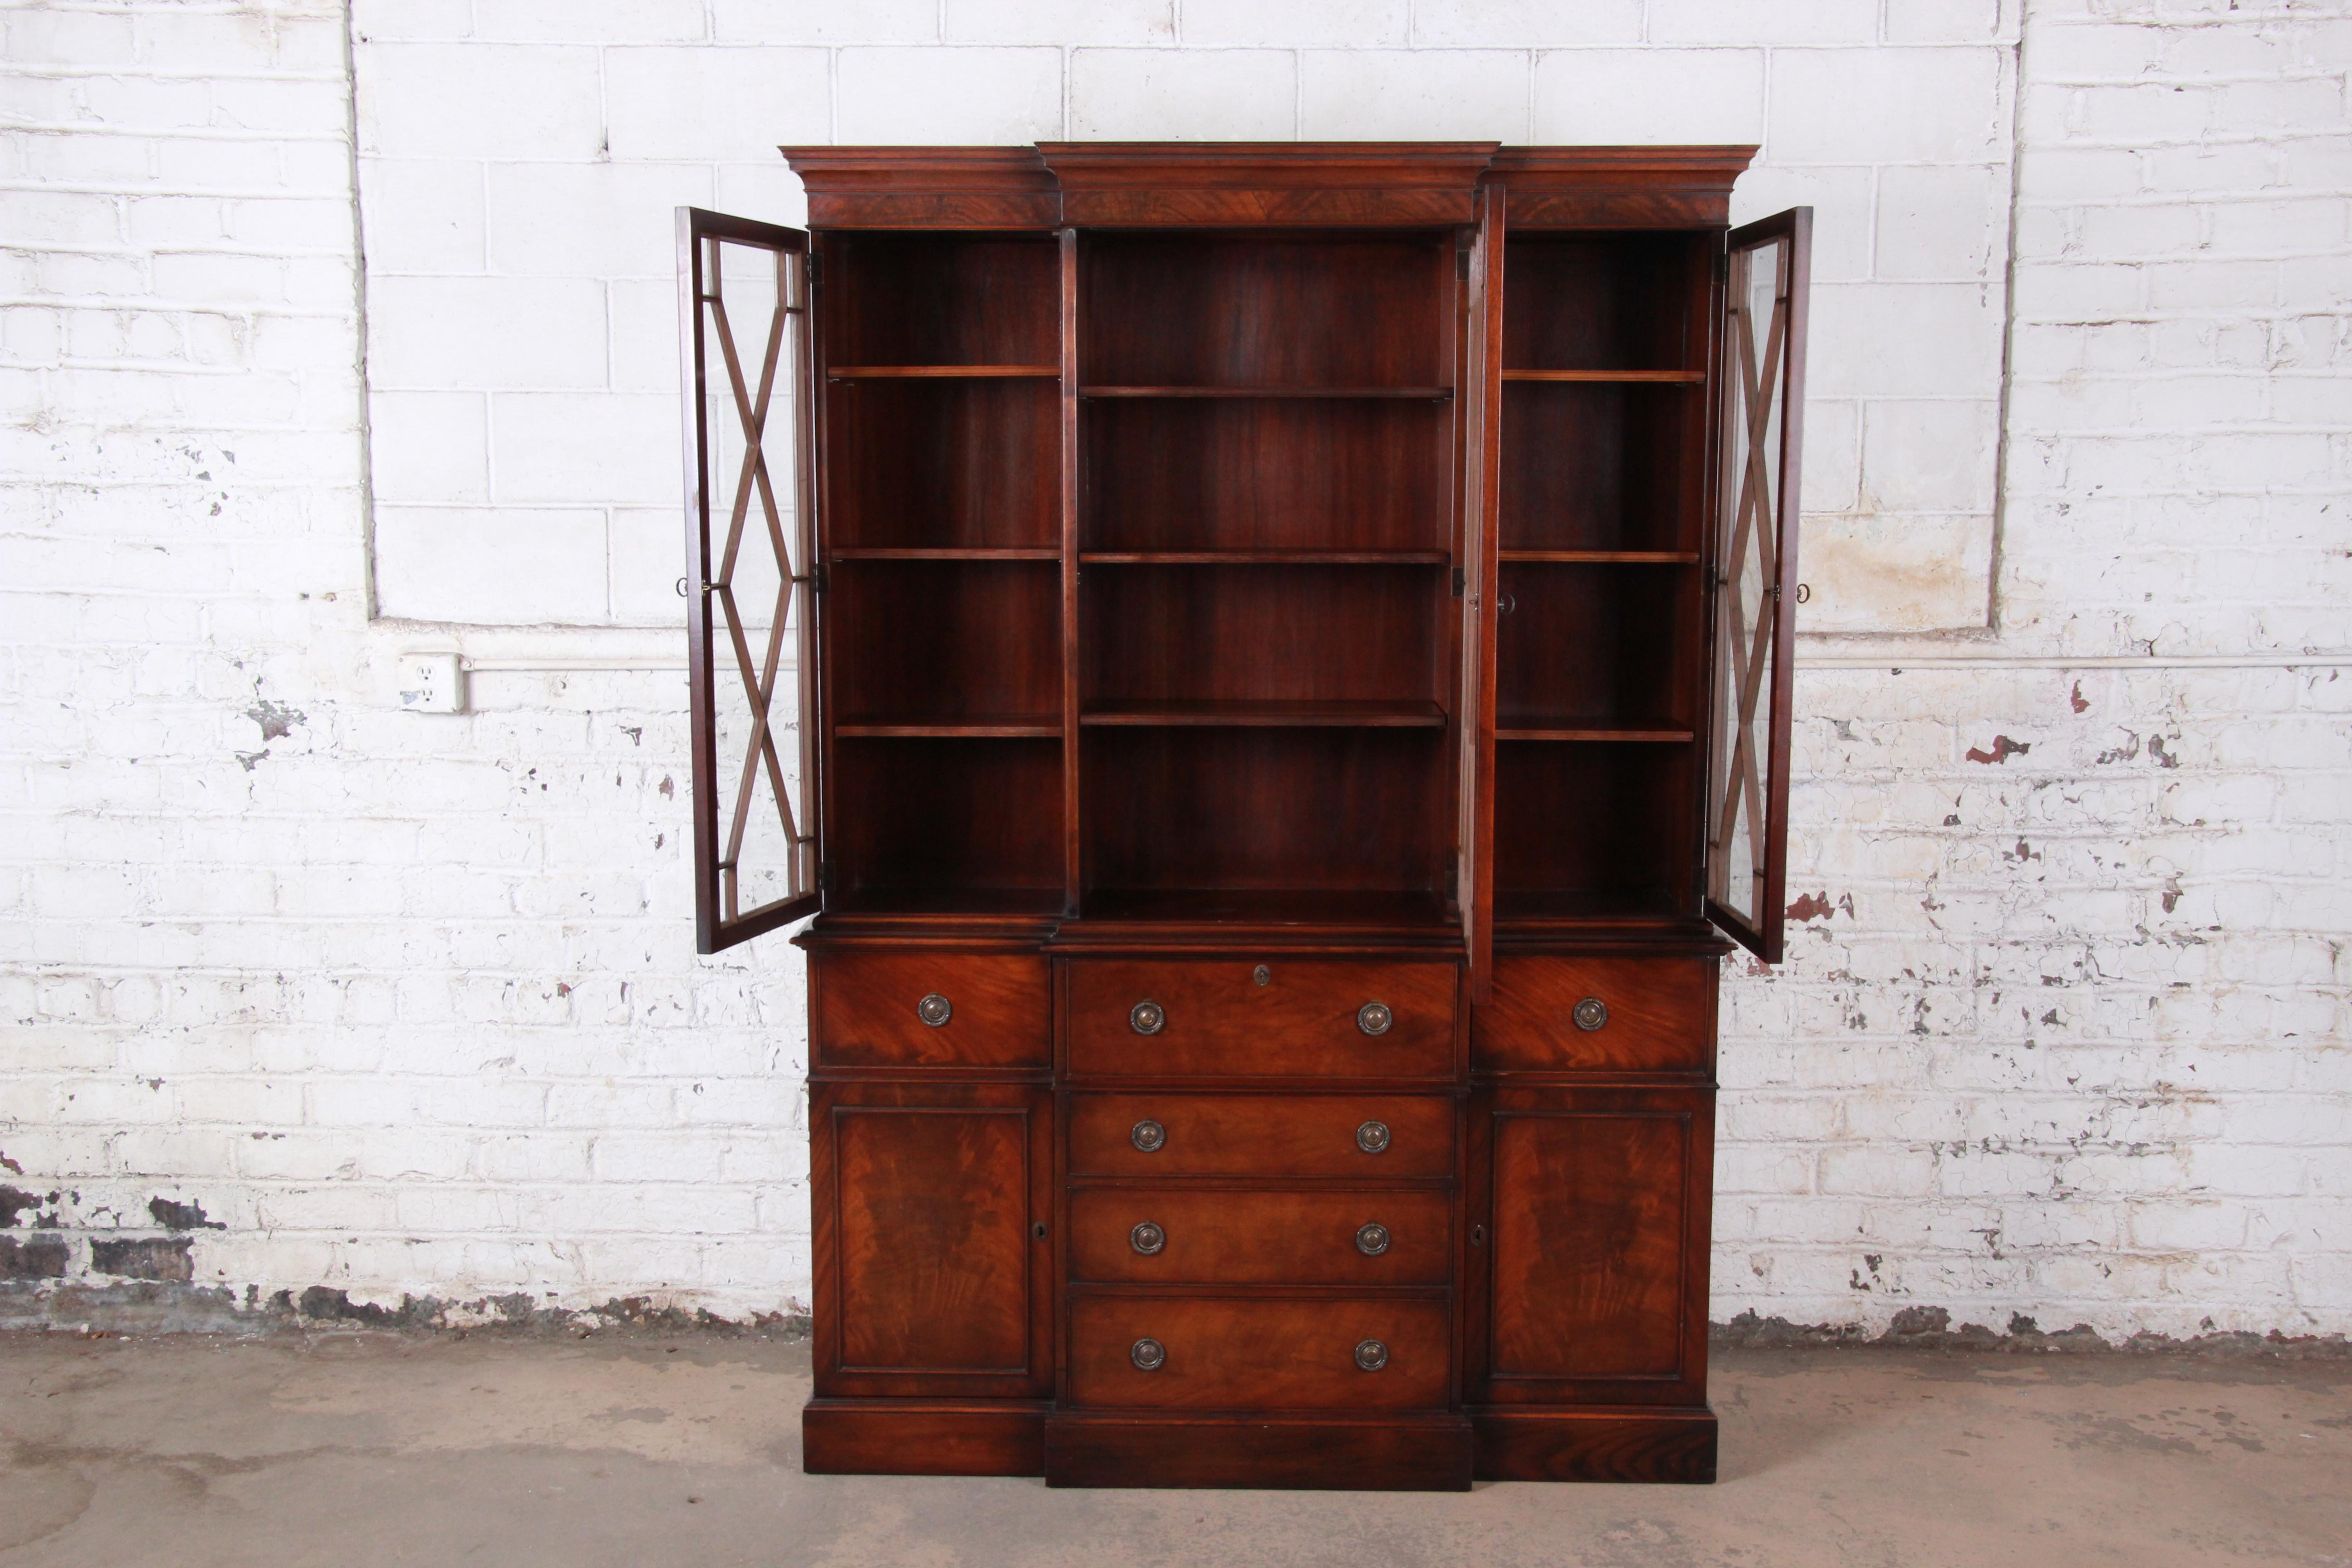 British Colonial Baker Furniture Mahogany Breakfront Bookcase Cabinet with Secretary Desk, 1940s